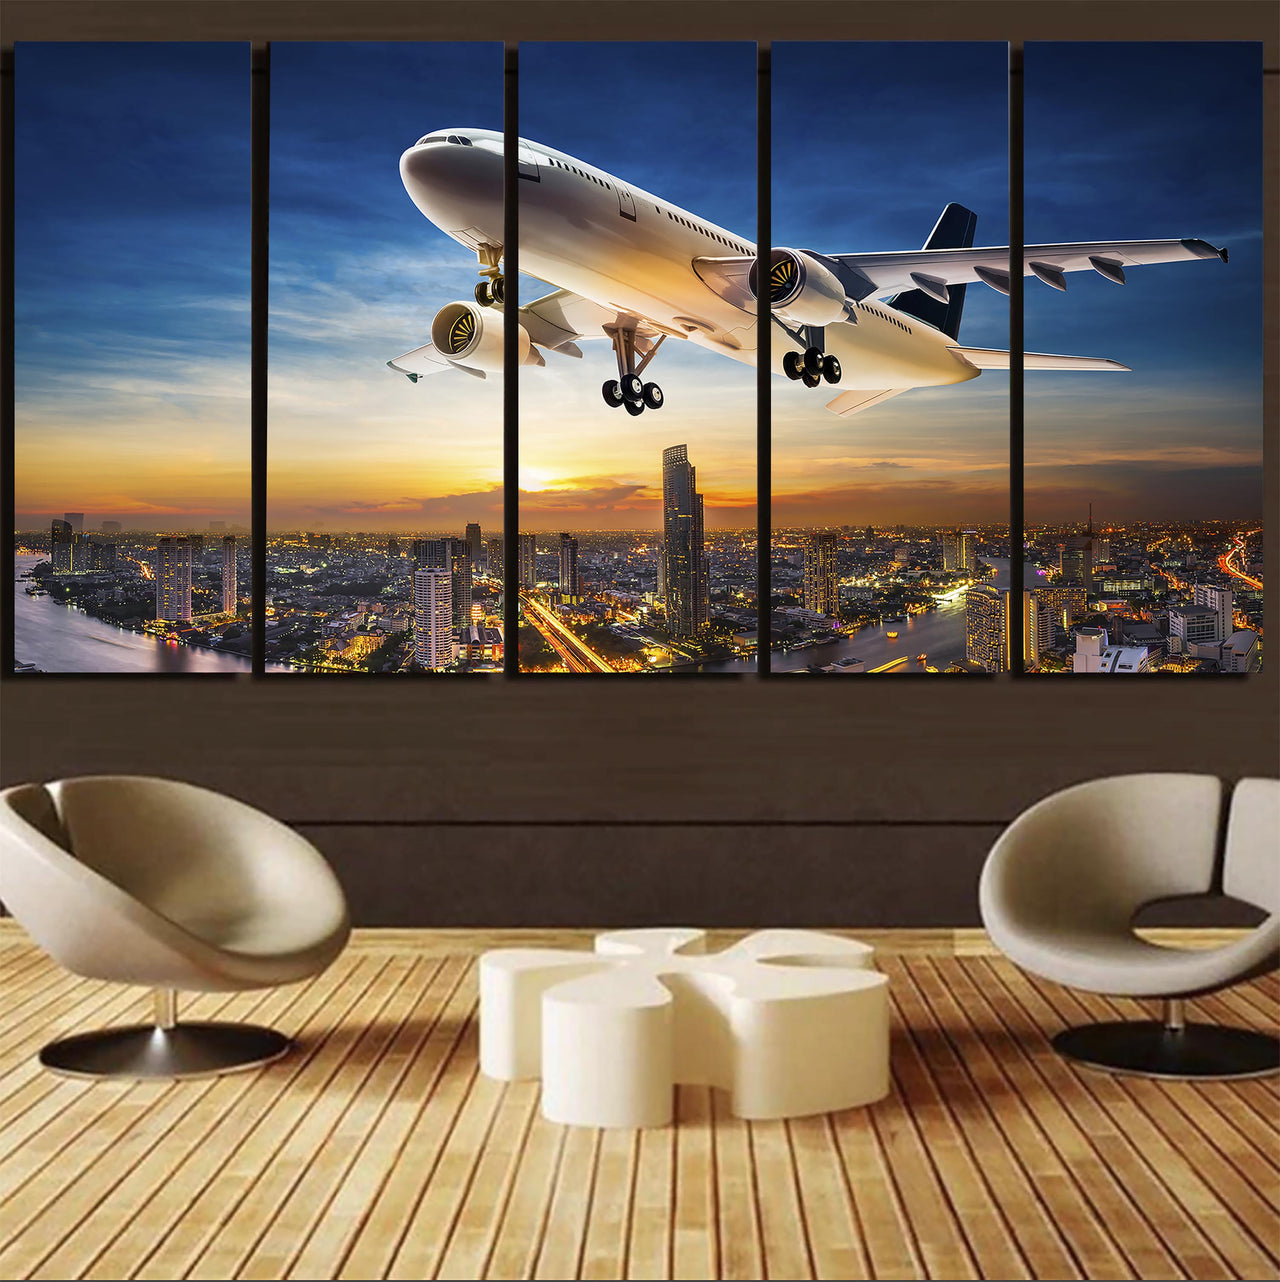 Super Aircraft over City at Sunset Canvas Prints (5 Pieces)